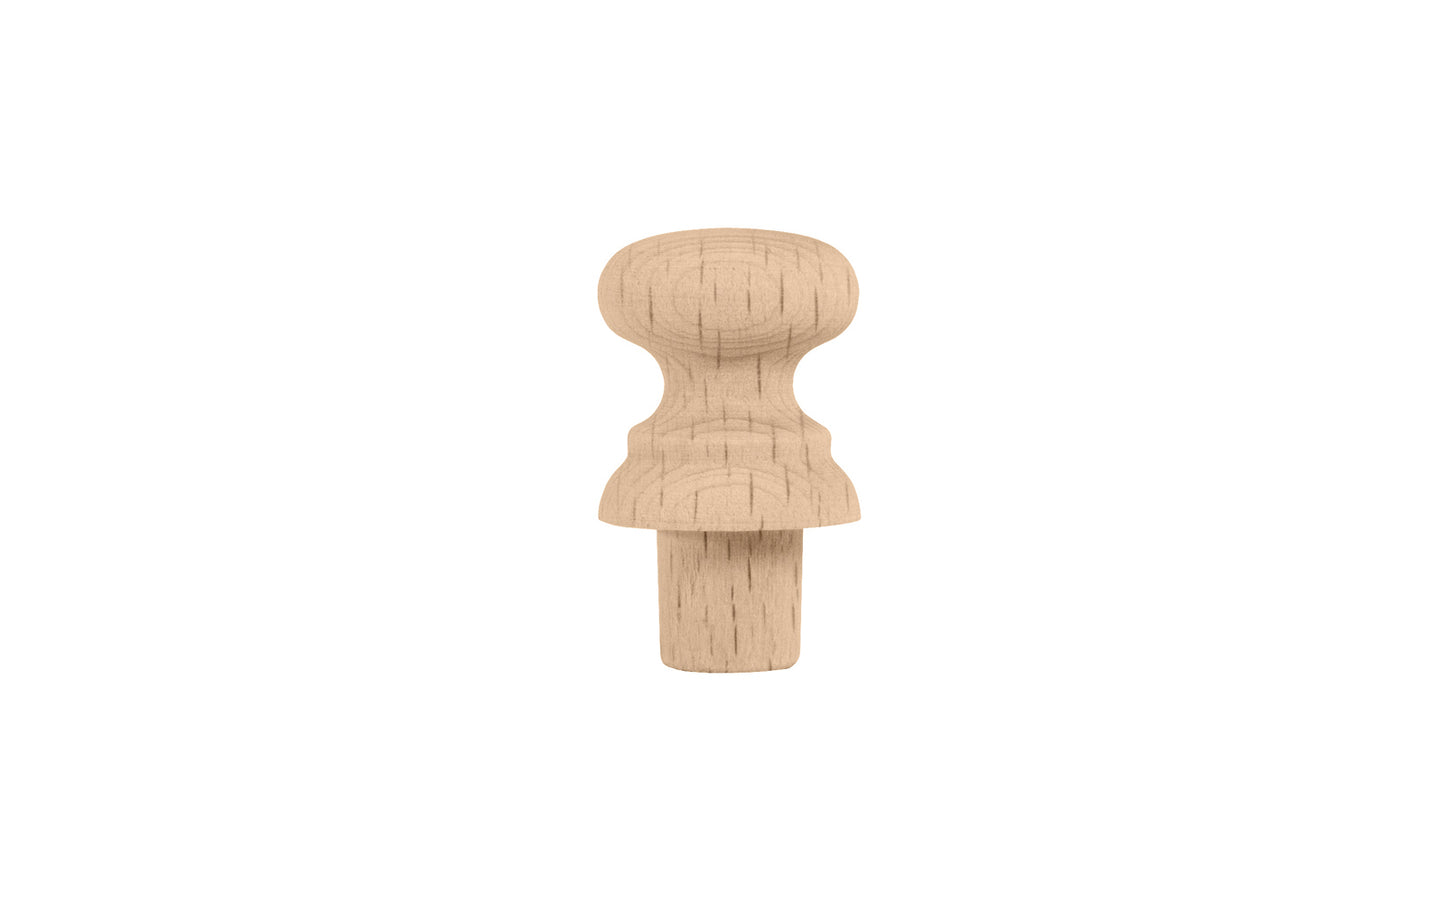 Traditional & Classic Small Shaker Beech Knob with Tenon. Made of unfinished solid beech wood, these wood knobs have a smooth & attractive look & feel. Wooden shaker knob for cabinets, drawers, & furniture. Old style Beechwood Shaker Knob. Wood Shaker Cabinet Knob. 11/16" diameter size knob.